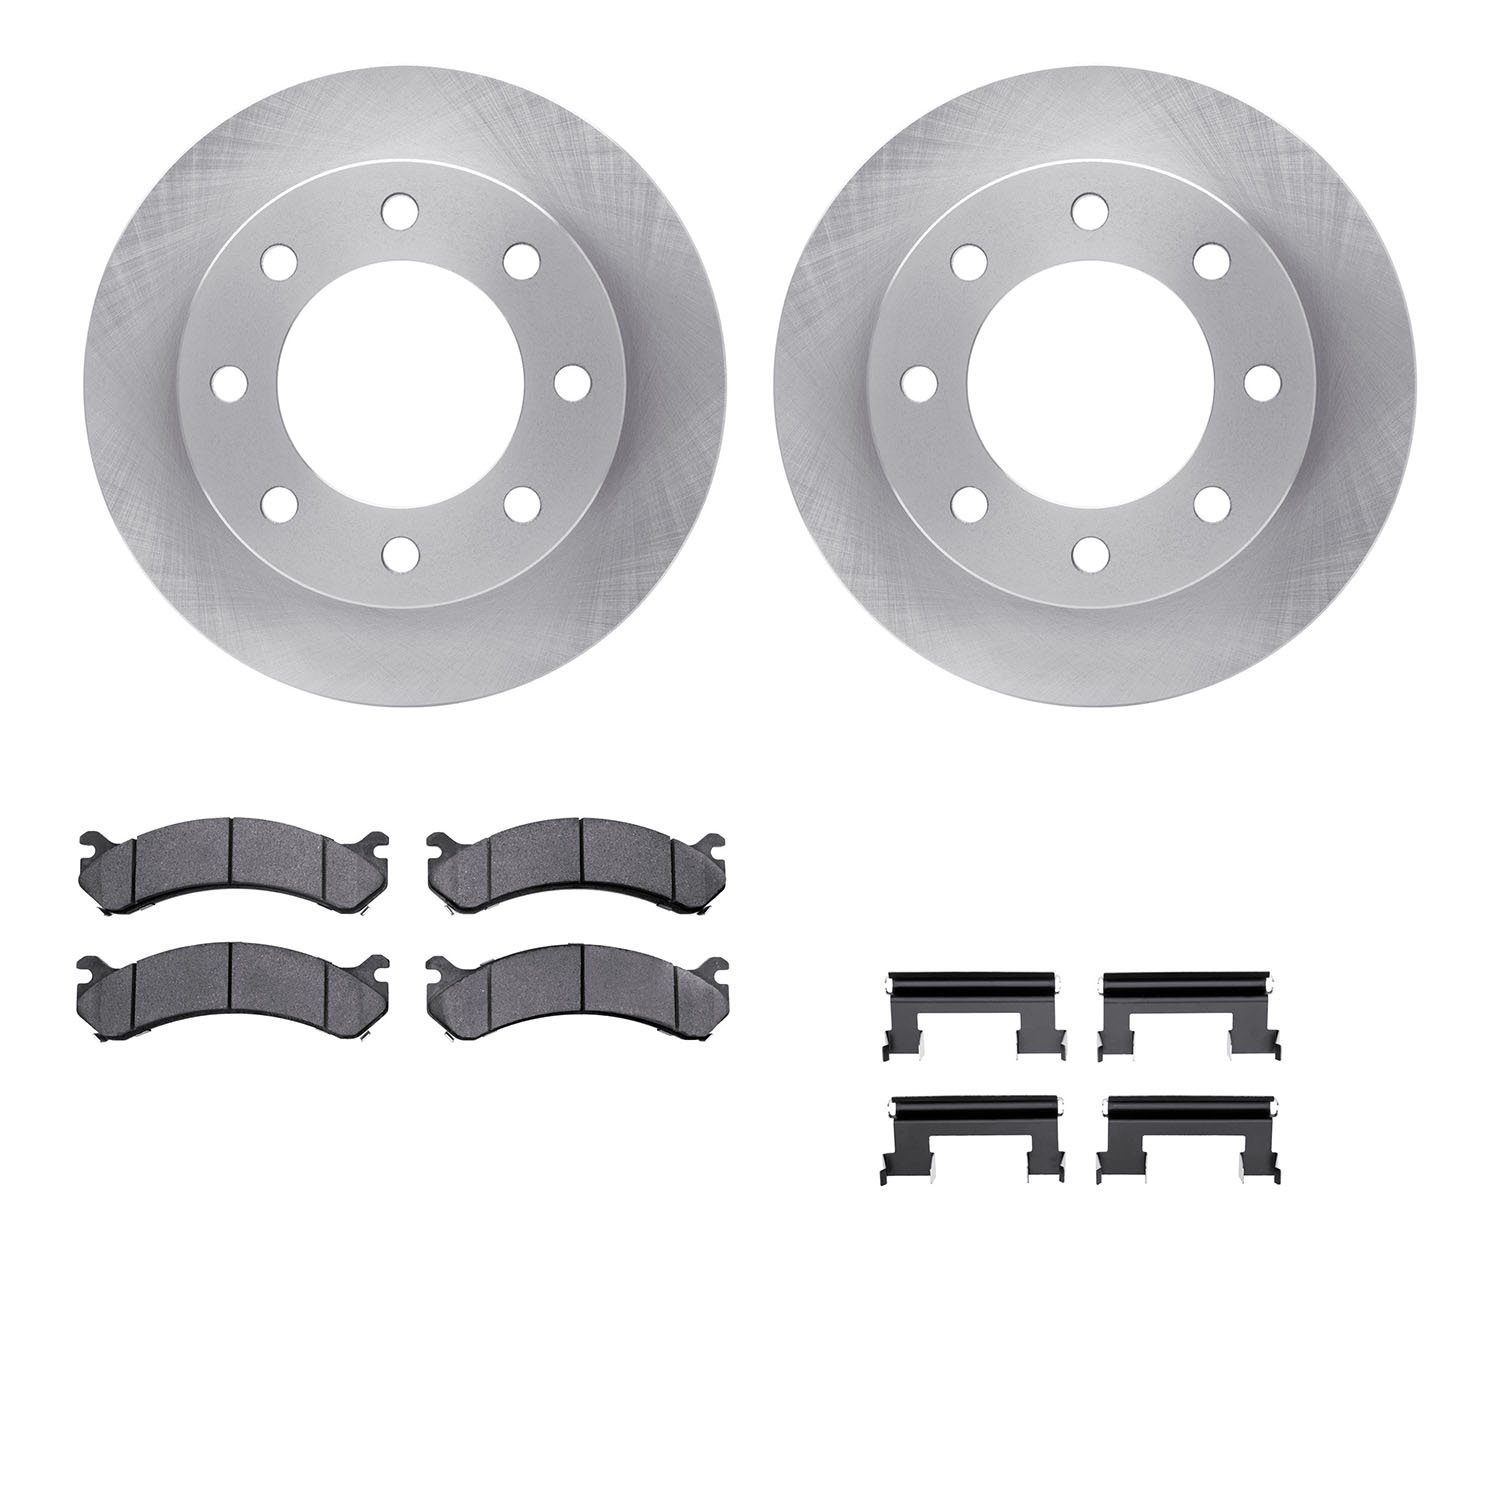 6412-48073 Brake Rotors with Ultimate-Duty Brake Pads Kit & Hardware, 1999-2020 GM, Position: Front